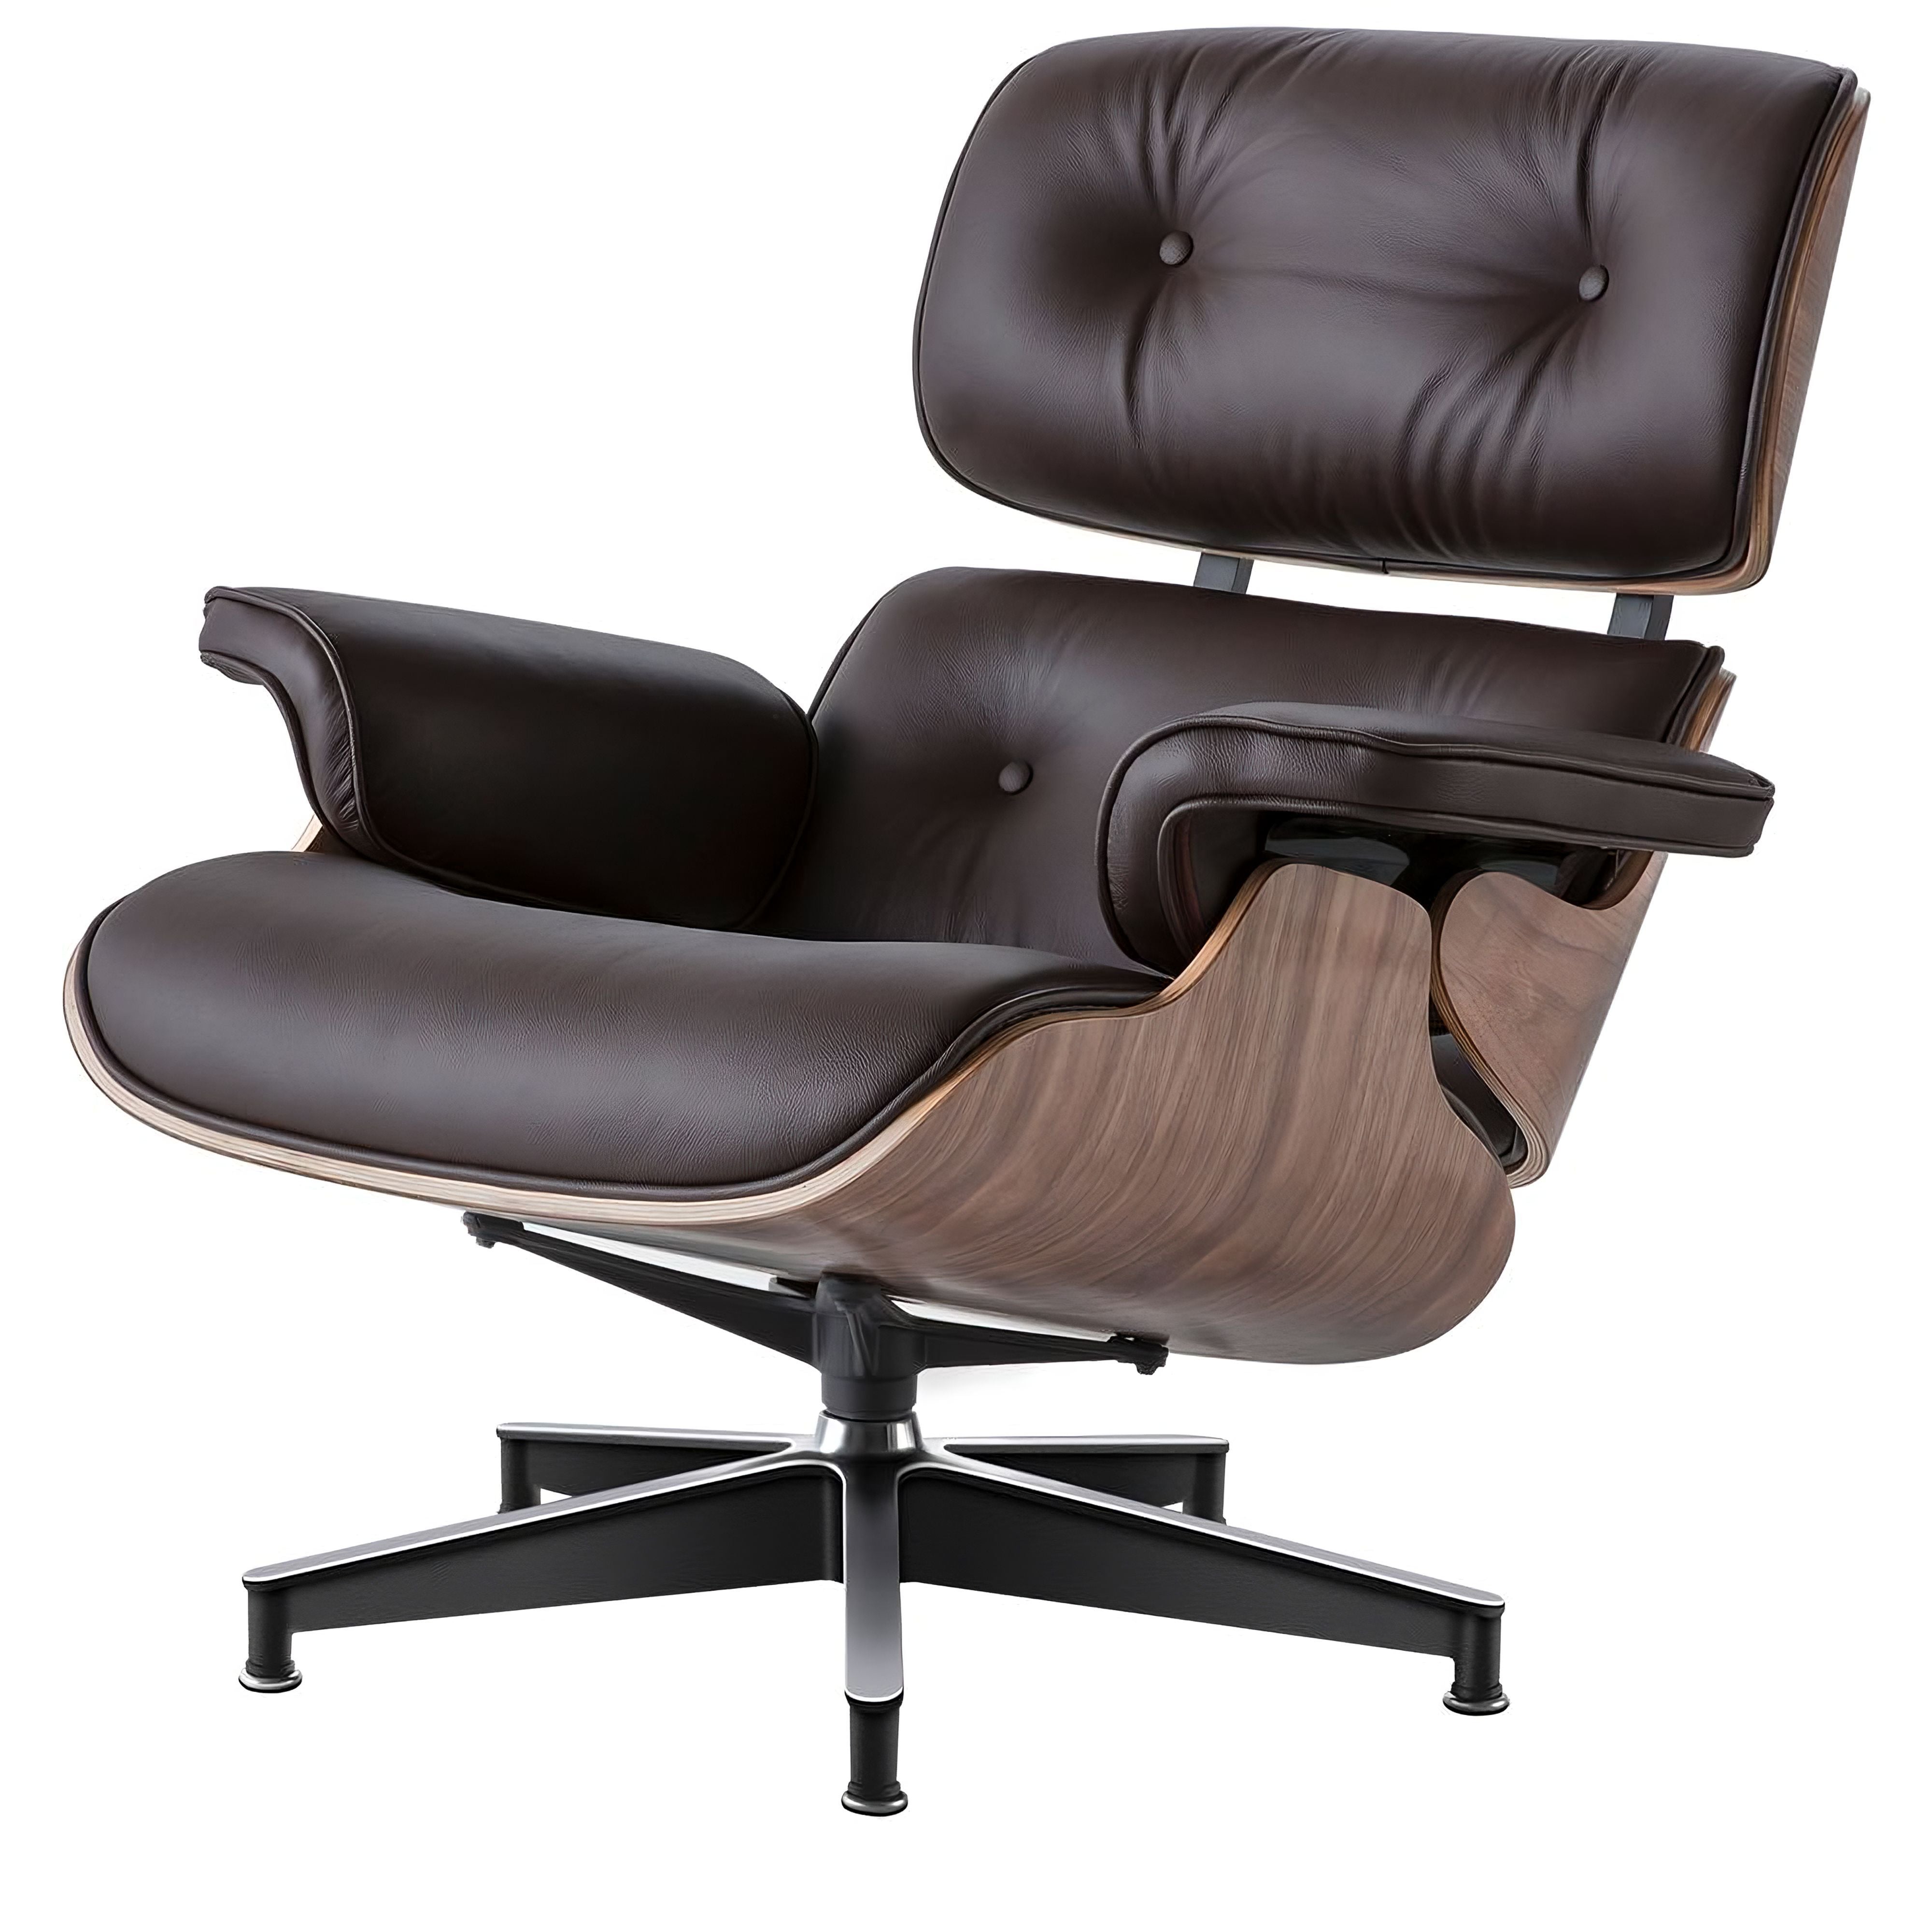 Charles and Ray Eames Lounge Chair, Full-Grain Leather, Aluminium, and Veneer